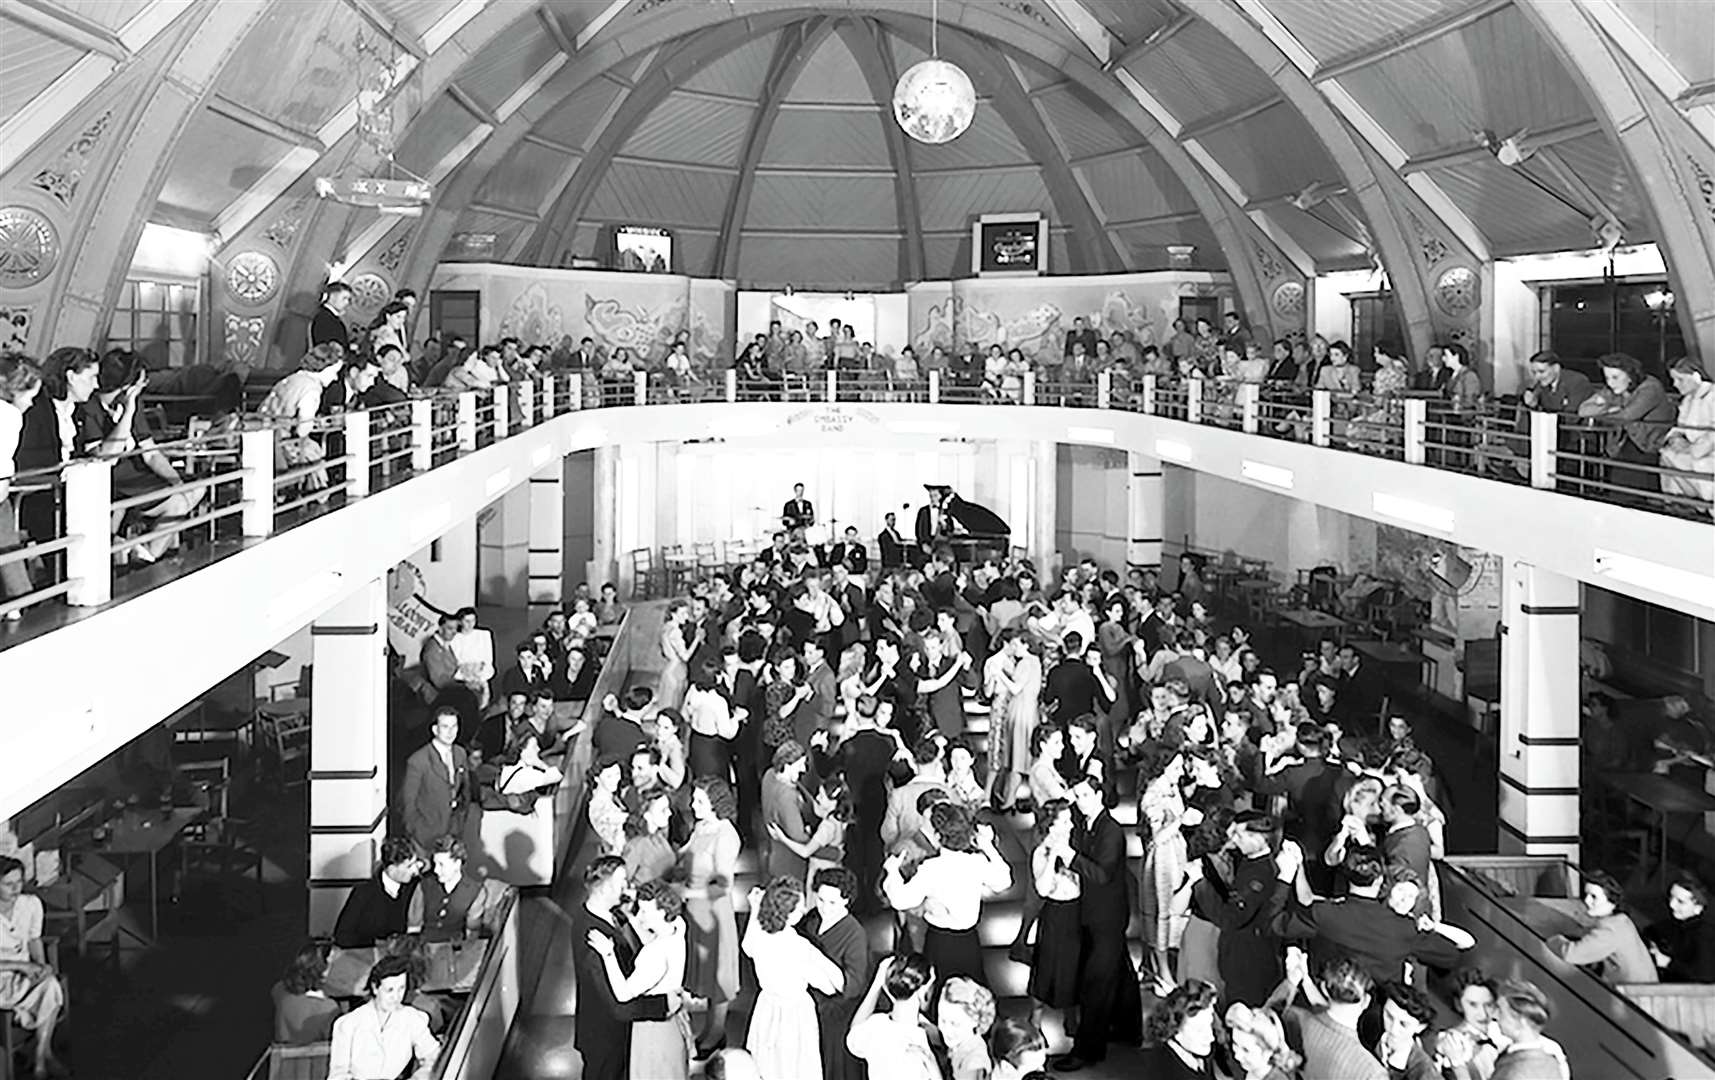 Dancing at the Supreme Ballroom - which would later become nightclubs before being demolished in the 1990s. Picture: Thanet District Council/SEAS Heritage Collection